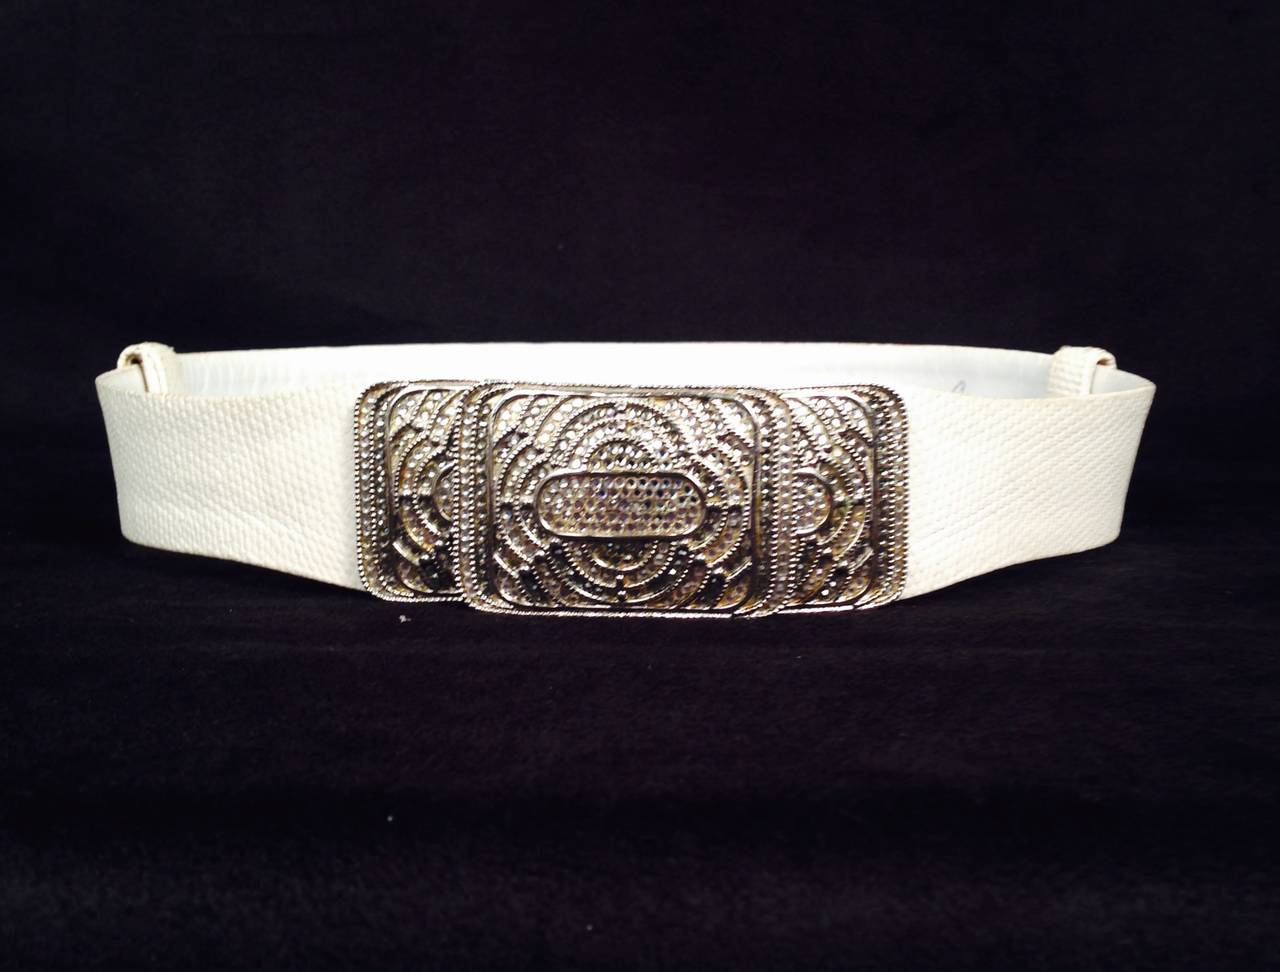 Vintage Ivory Lizard Belt With Deco Swarovkski Crystal Buckle proves that Judith Leiber was much more than the queen of minaudieres!  Features luxurious lizard and a crystal encrusted buckle reminiscent of Art Deco design.  Adjusts to waist maximum